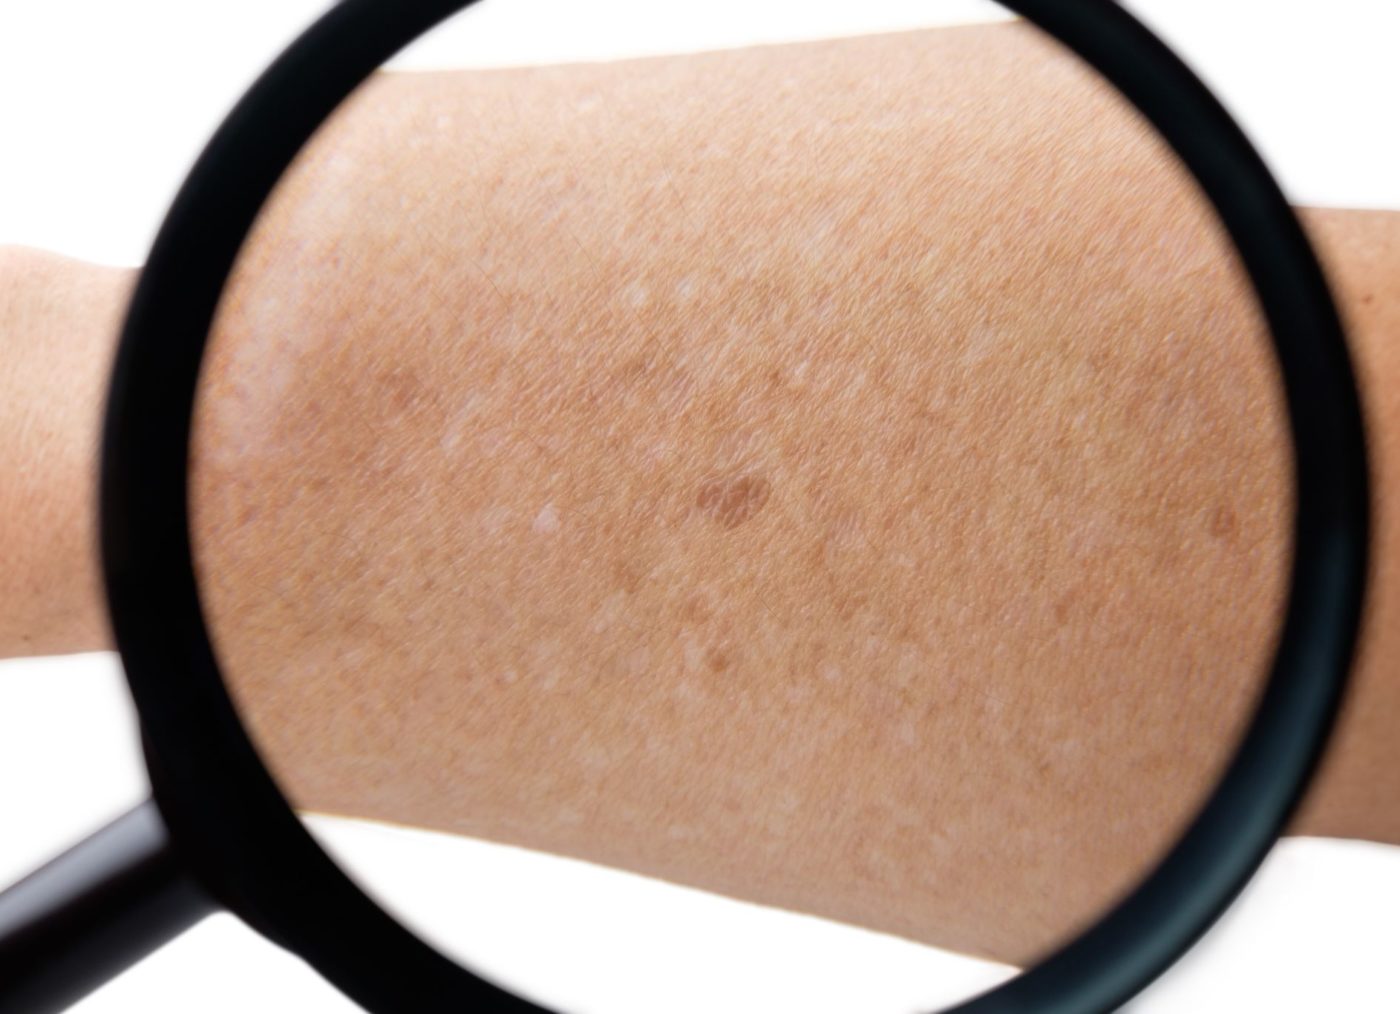 Magnifying glass on arm with Small white and brown spots on the skin